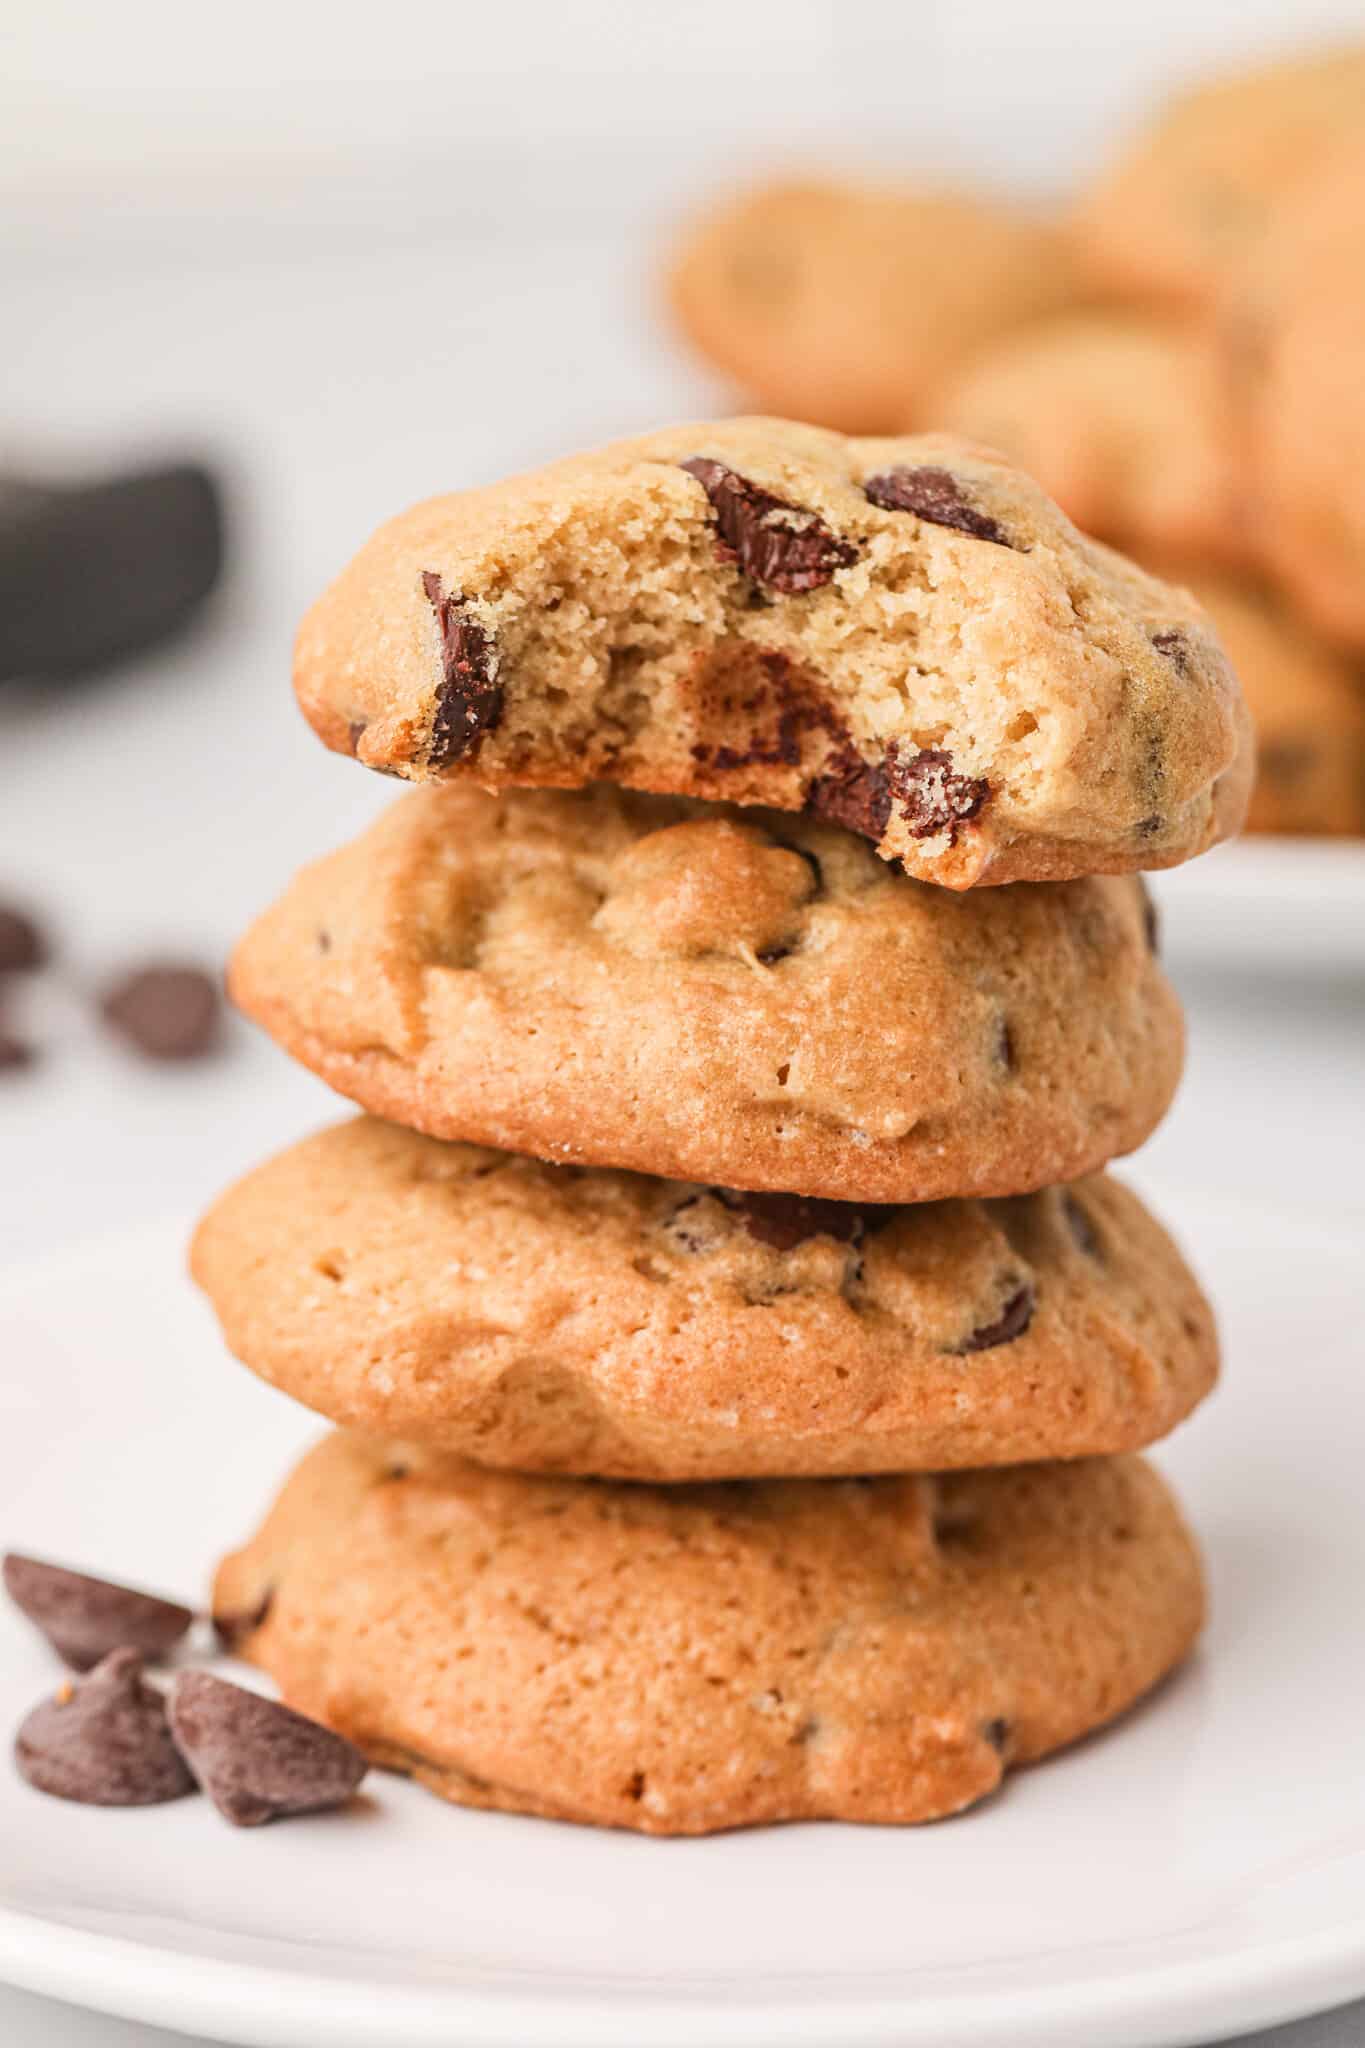 Air Fryer Chocolate Chip Cookies are soft and chewy cookies loaded with chocolate chips.